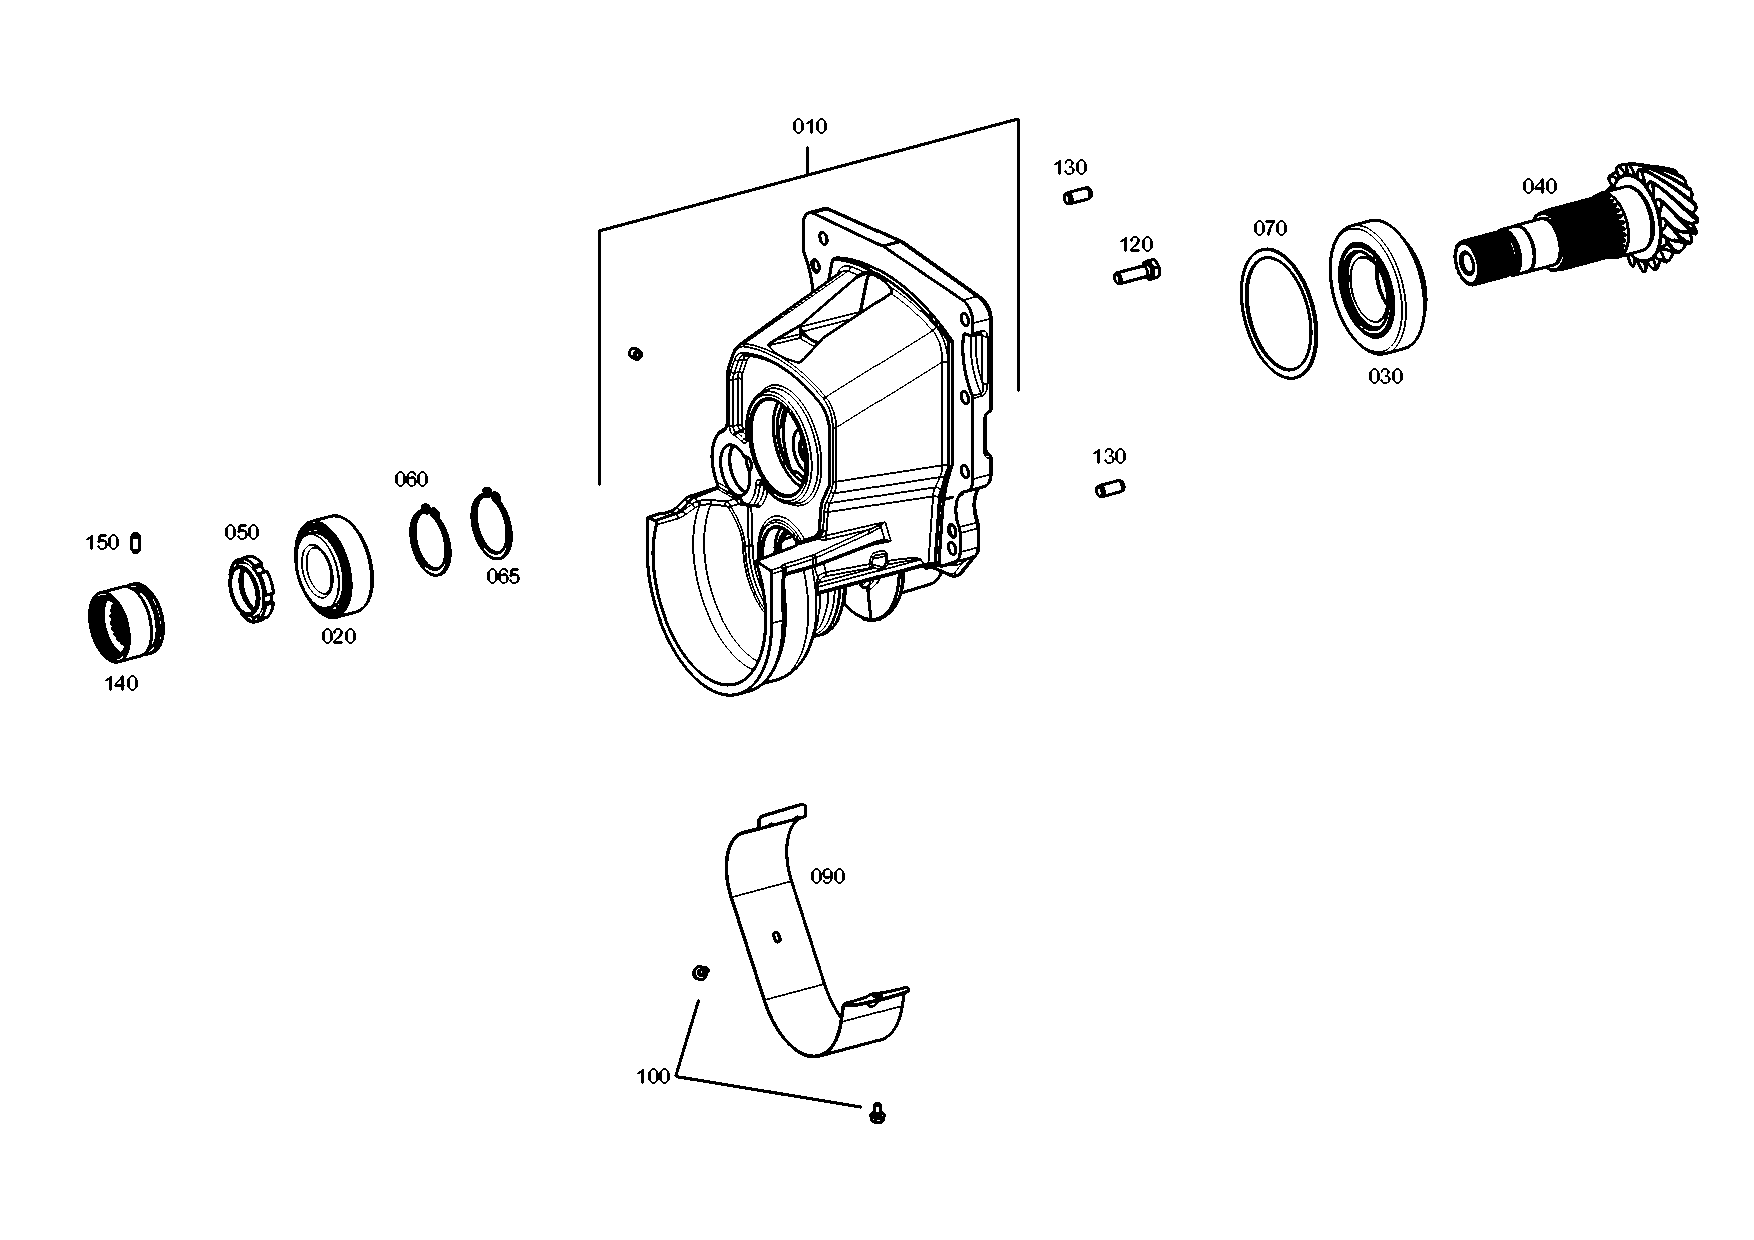 drawing for TITAN GMBH 199118250359 - ADJUSTMENT PLATE (figure 3)